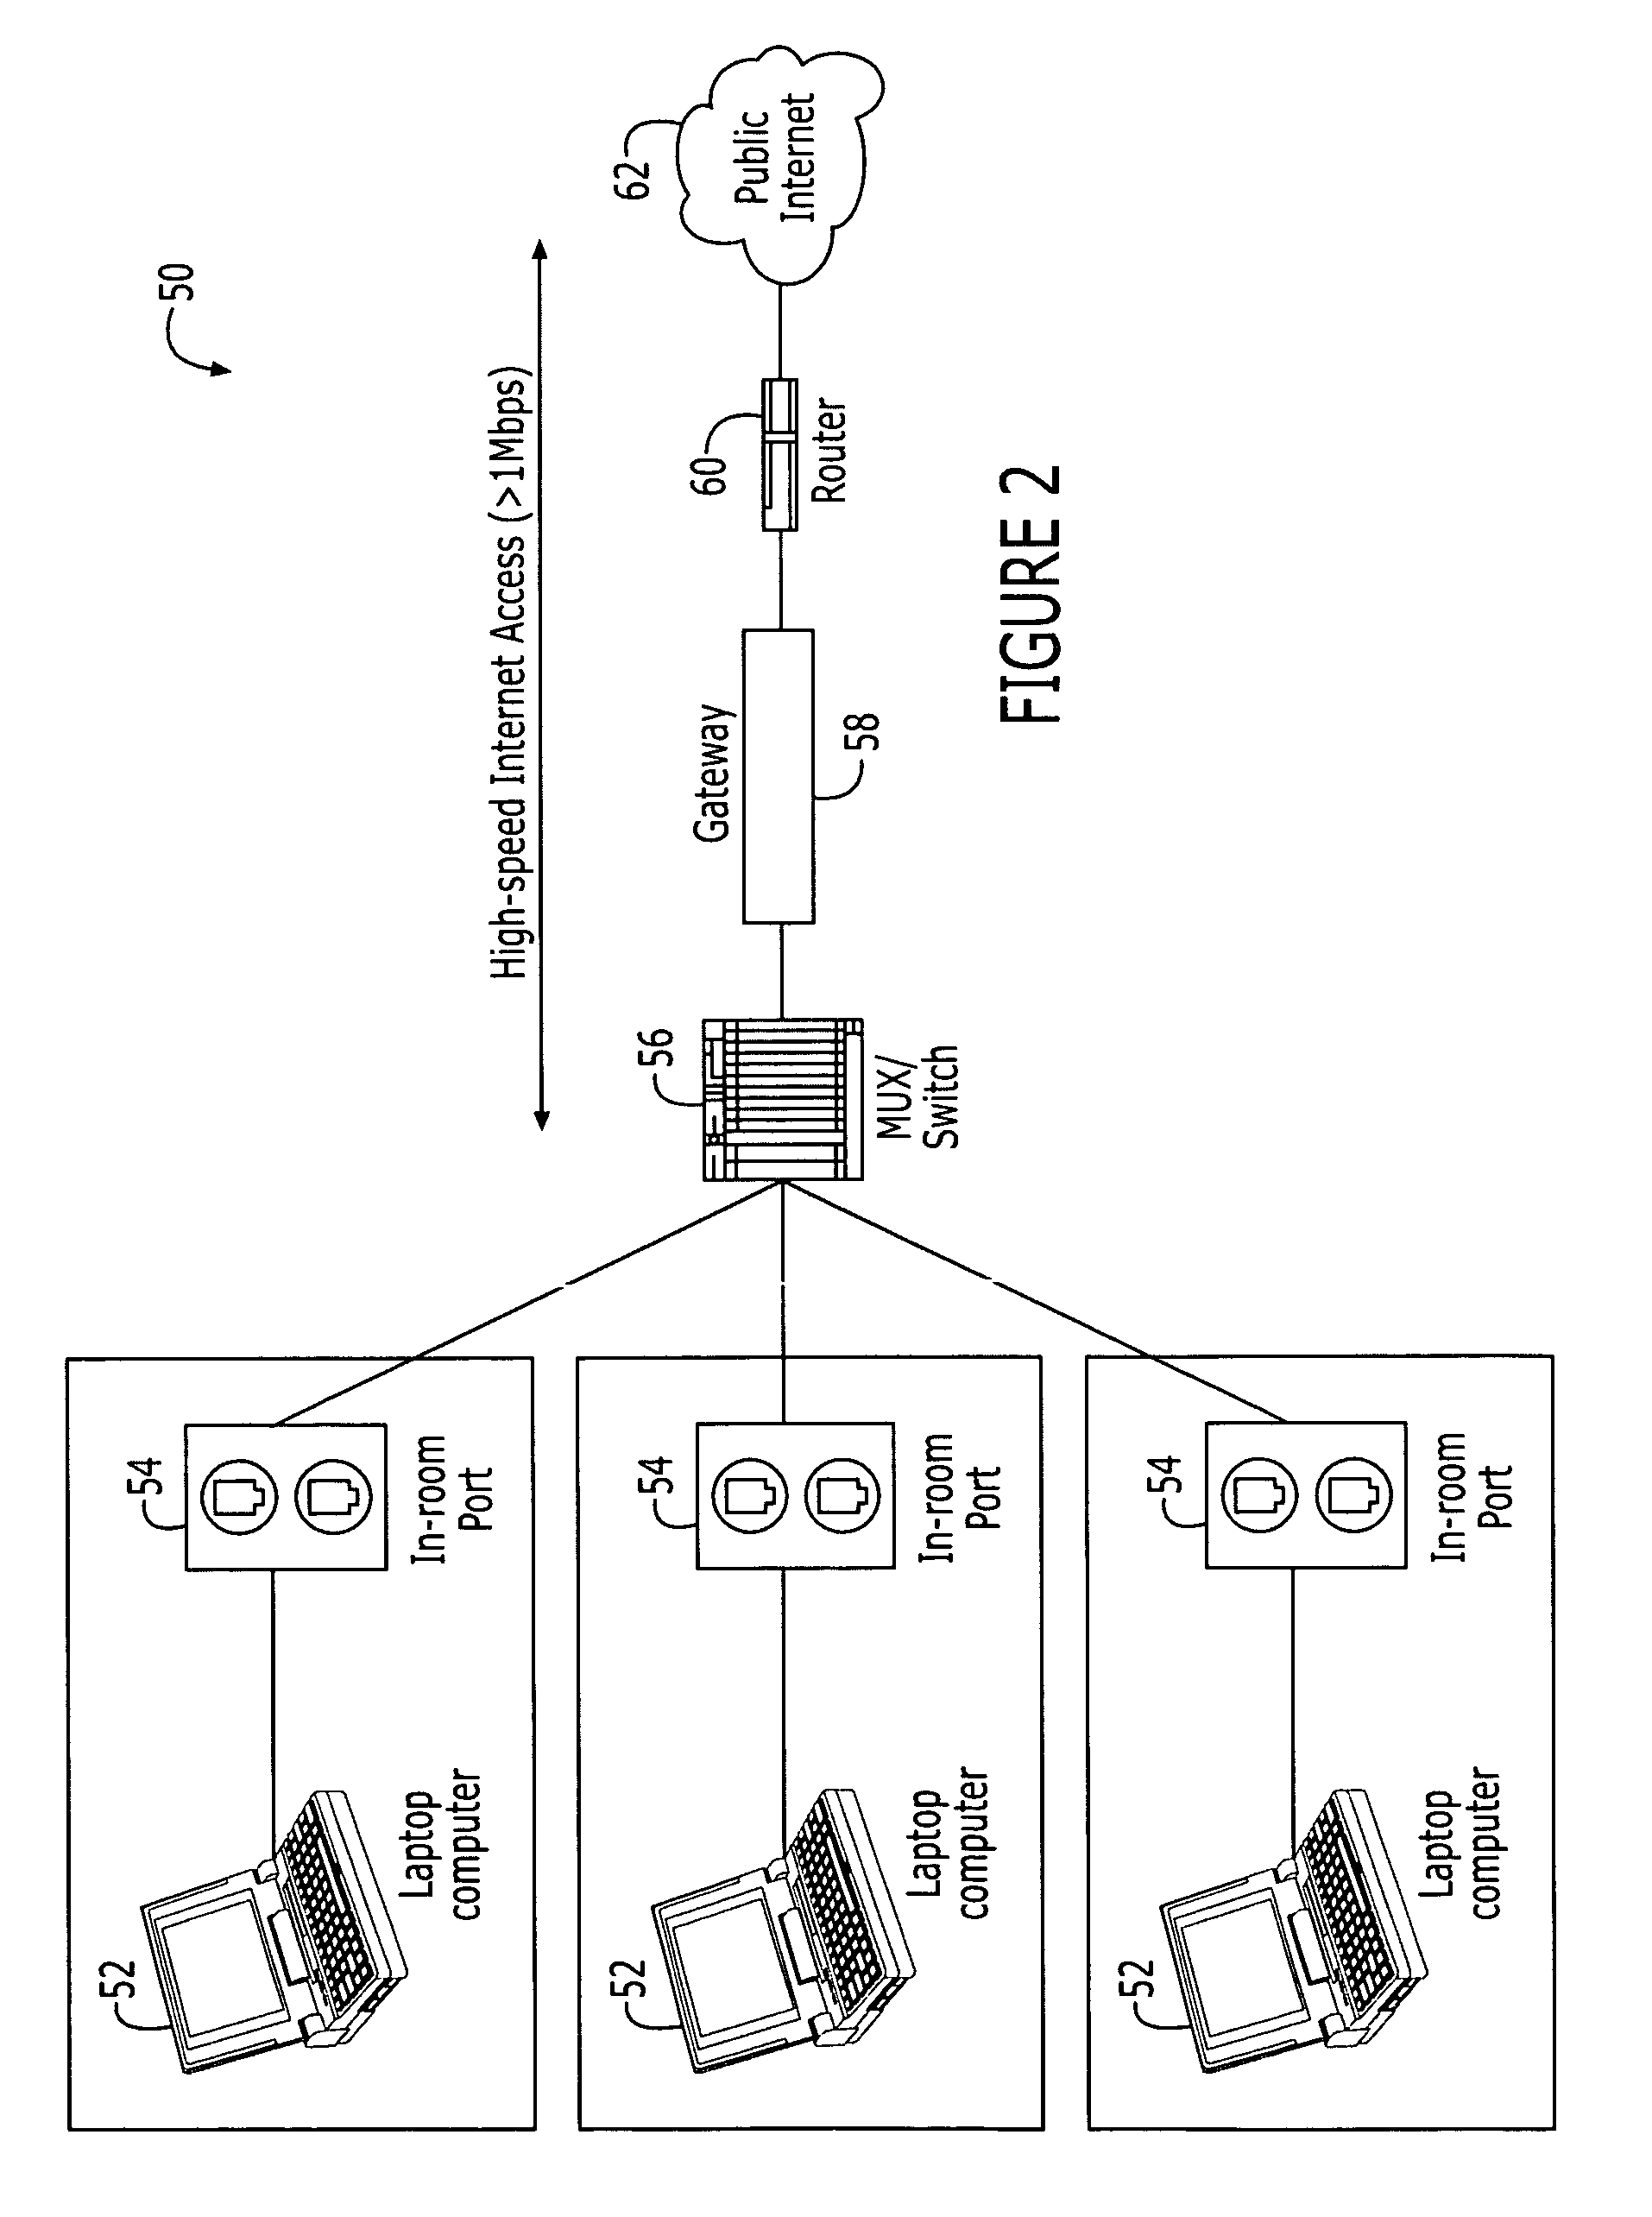 Location-based identification for use in a communications network